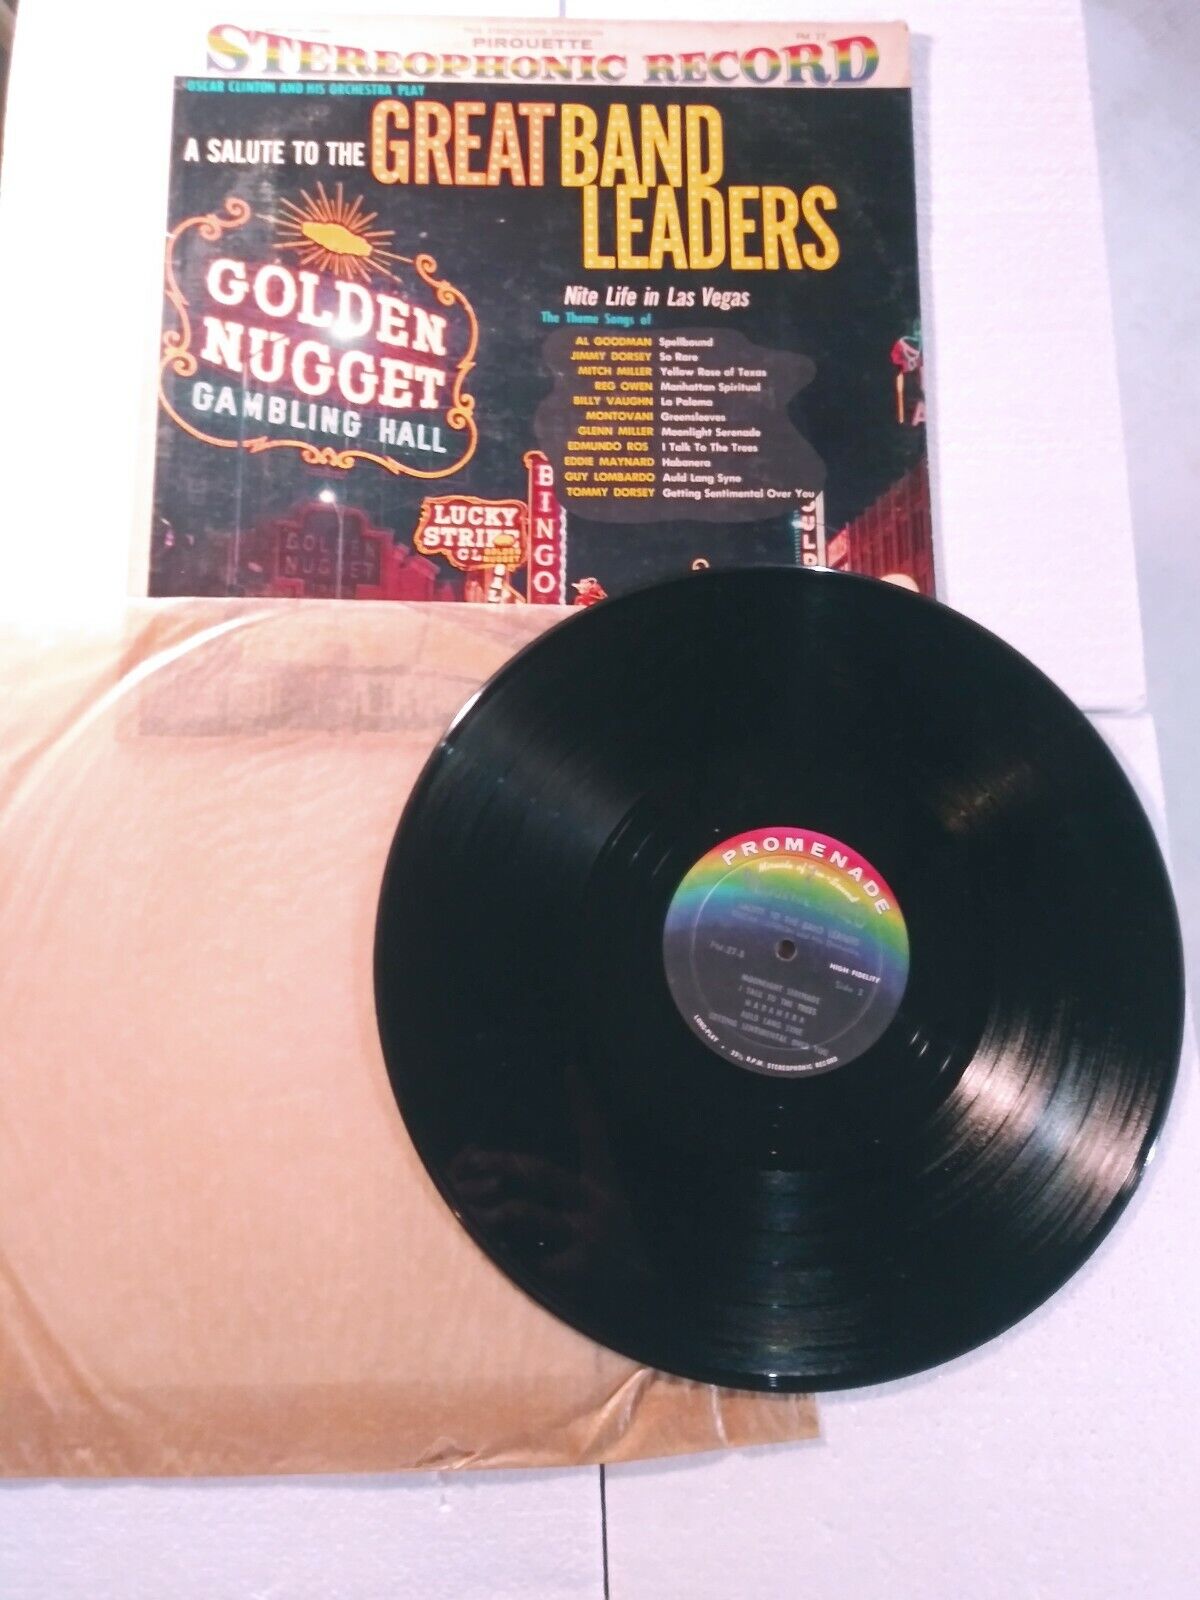 A Salute To The Great Band Leaders Nite Life In Las Vegas NV 60s LP Pirouette 27